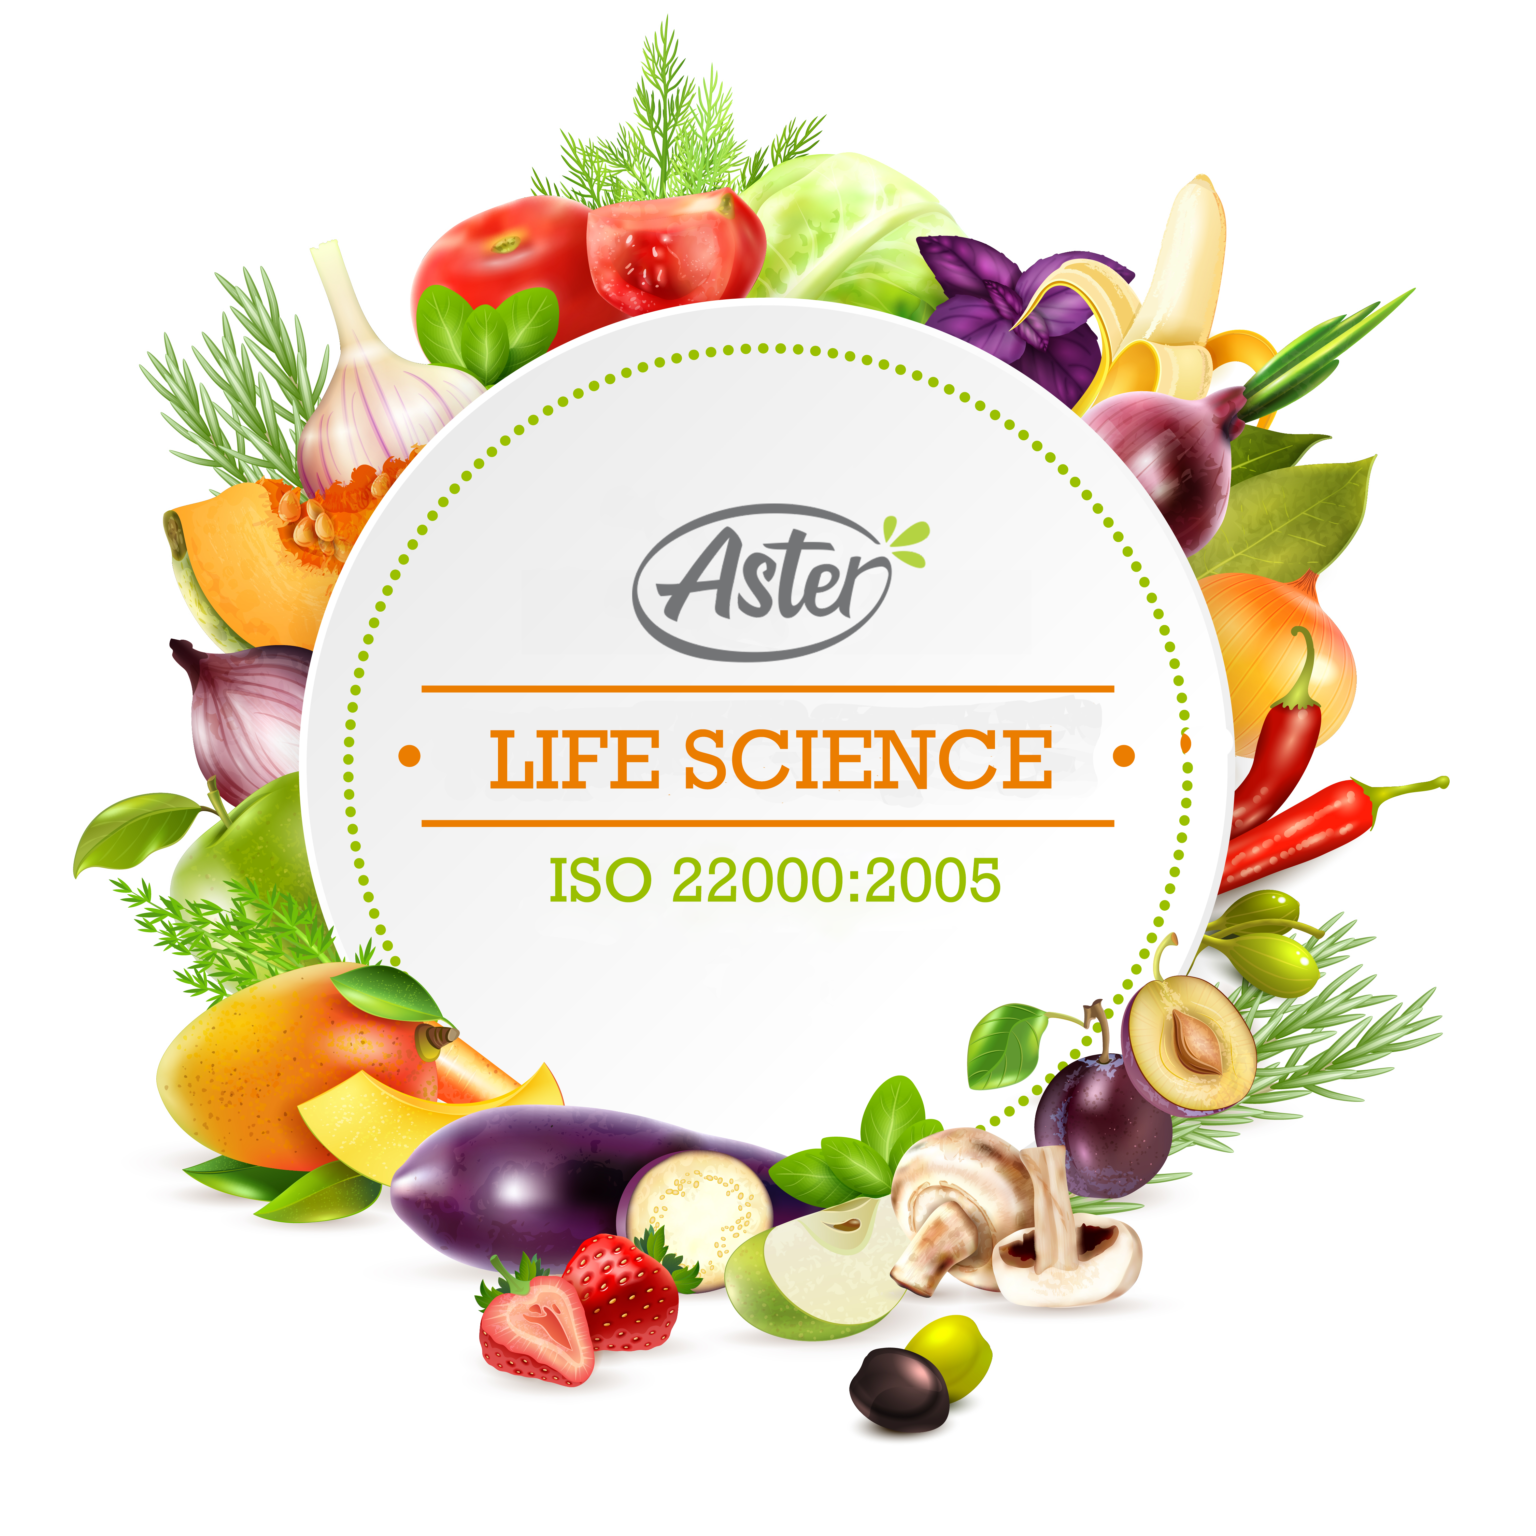 Top Nutraceutical Companies in India – Aster Lifes'